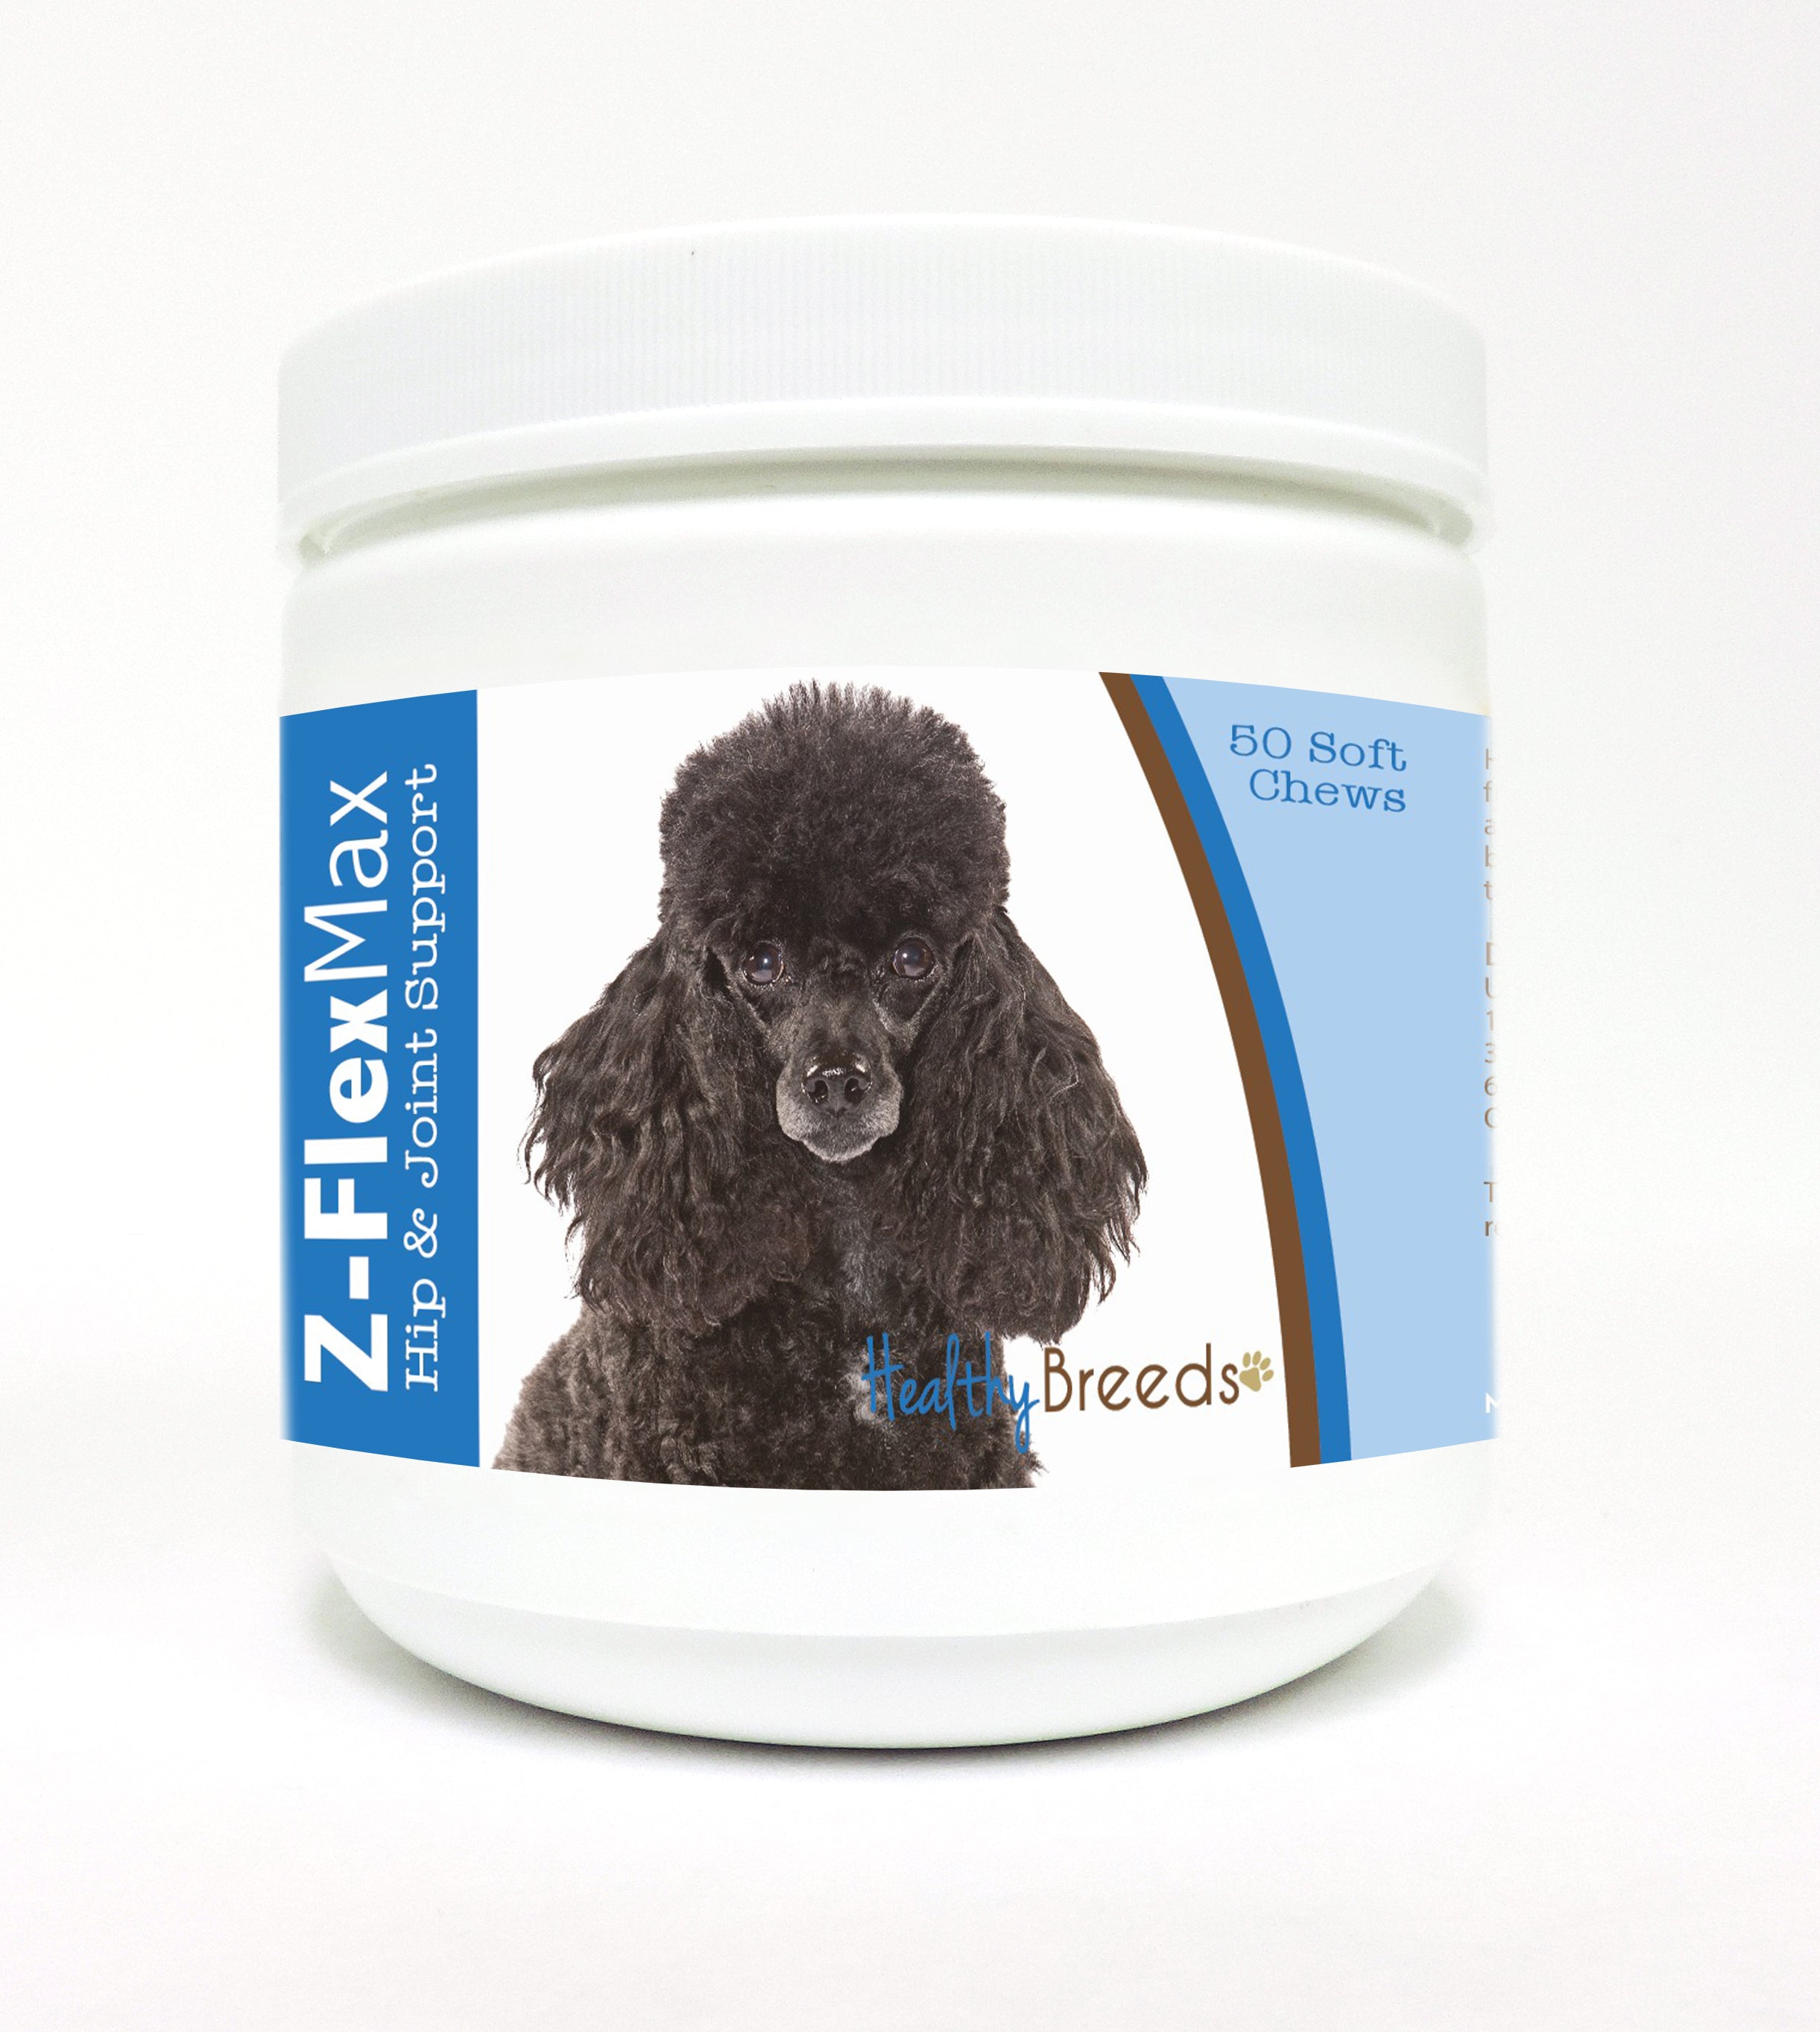 Poodle Z-Flex Max Hip and Joint Soft Chews 50 Count